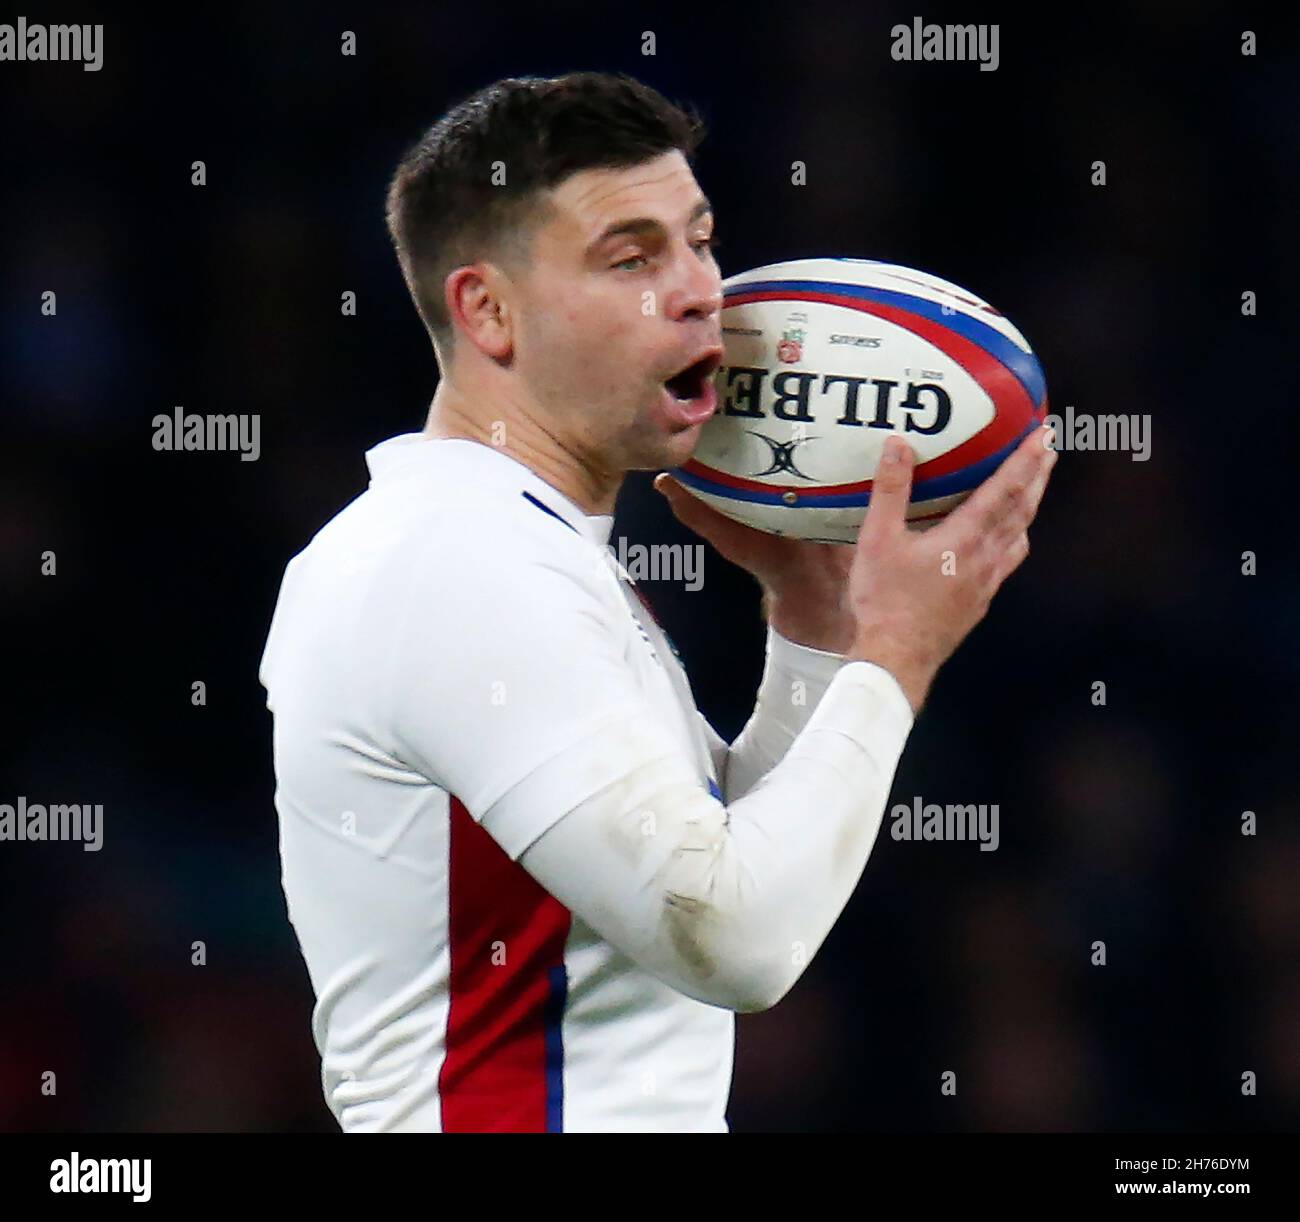 London, UK. 20th Nov, 2021. LONDON, ENGLAND - NOVEMBER 20: Ben Youngs of England during Autumn International Series match between England and South Africa, at Twickenham Stadium on 20th November, 2021 in London, England Credit: Action Foto Sport/Alamy Live News Stock Photo